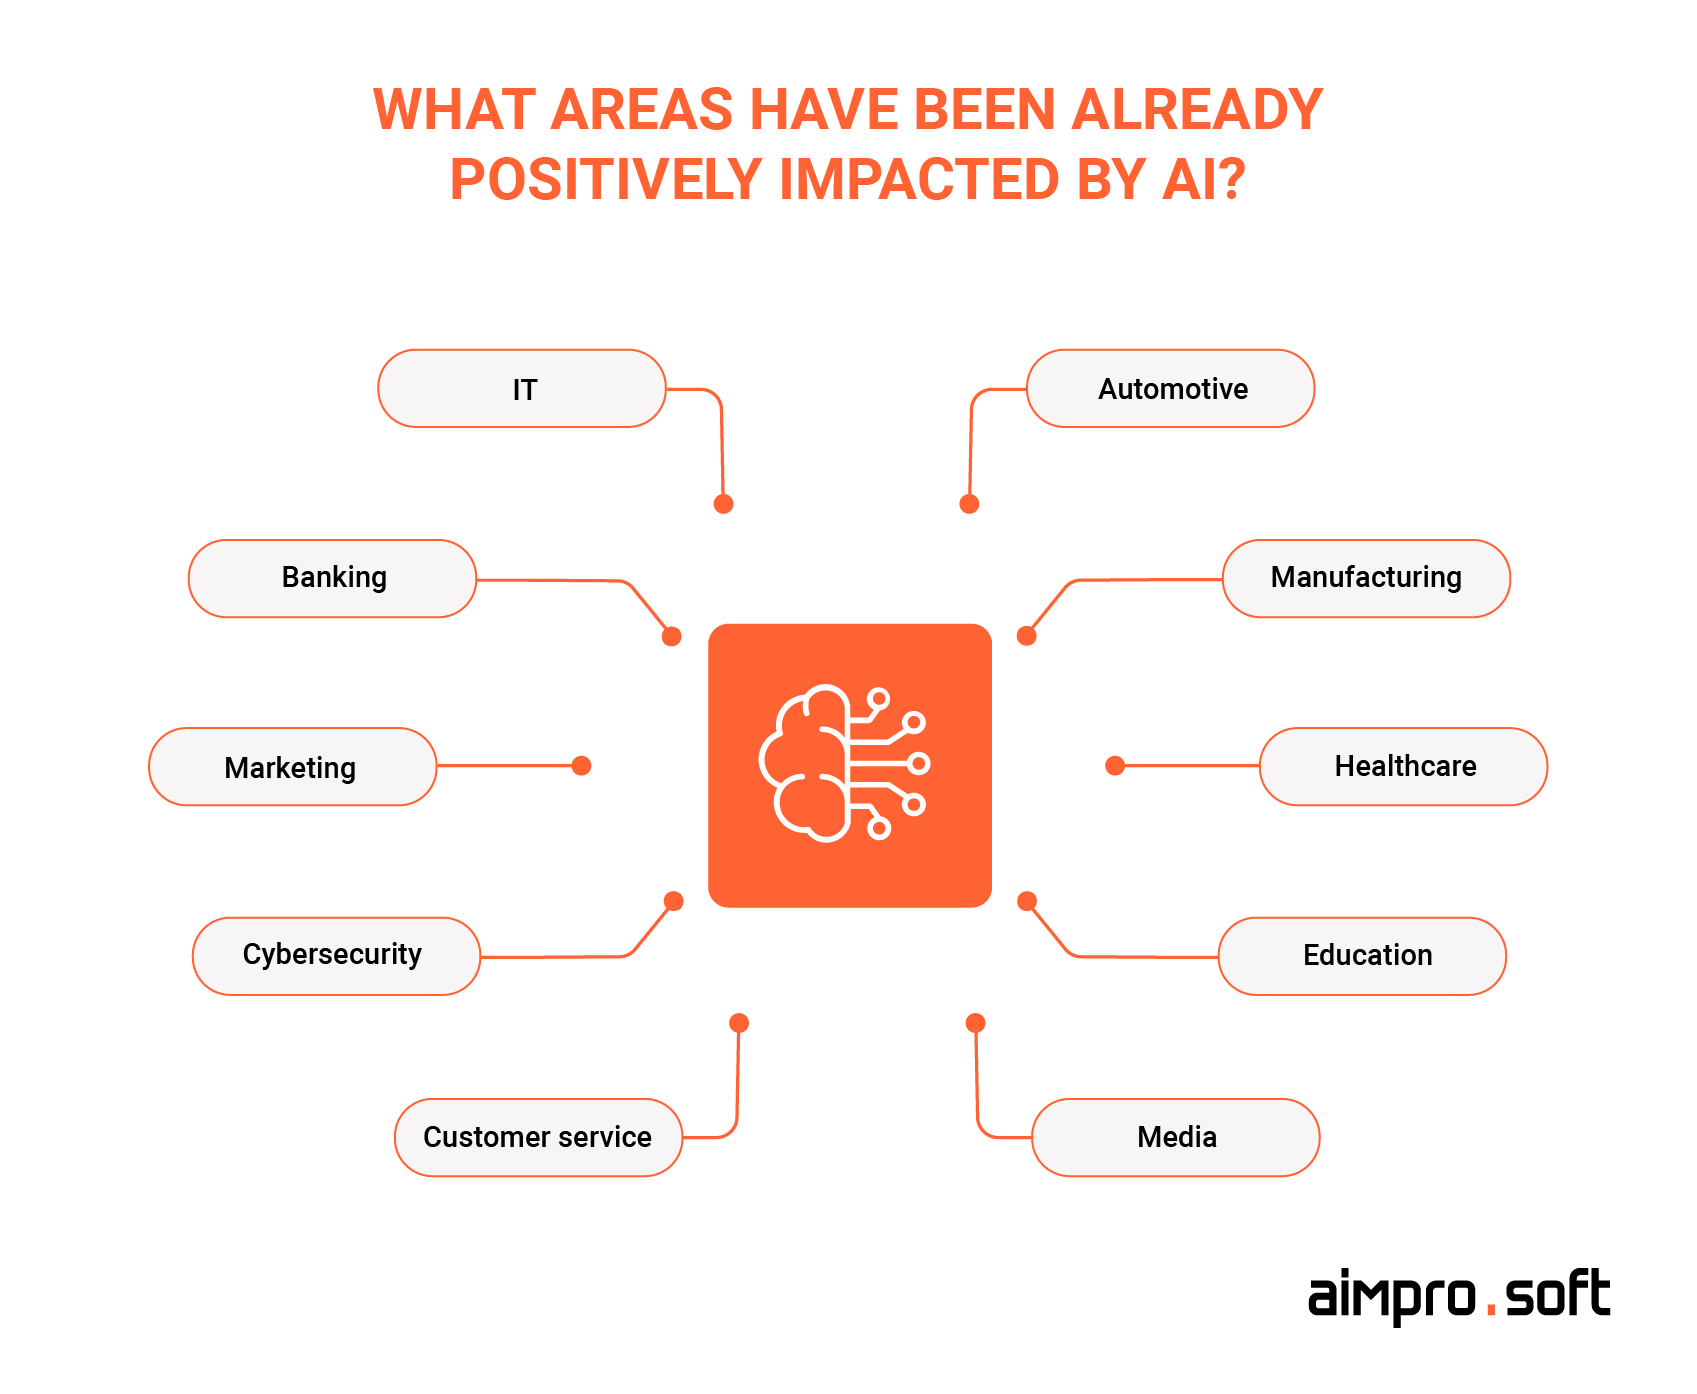 Sectors significantly impacted by AI